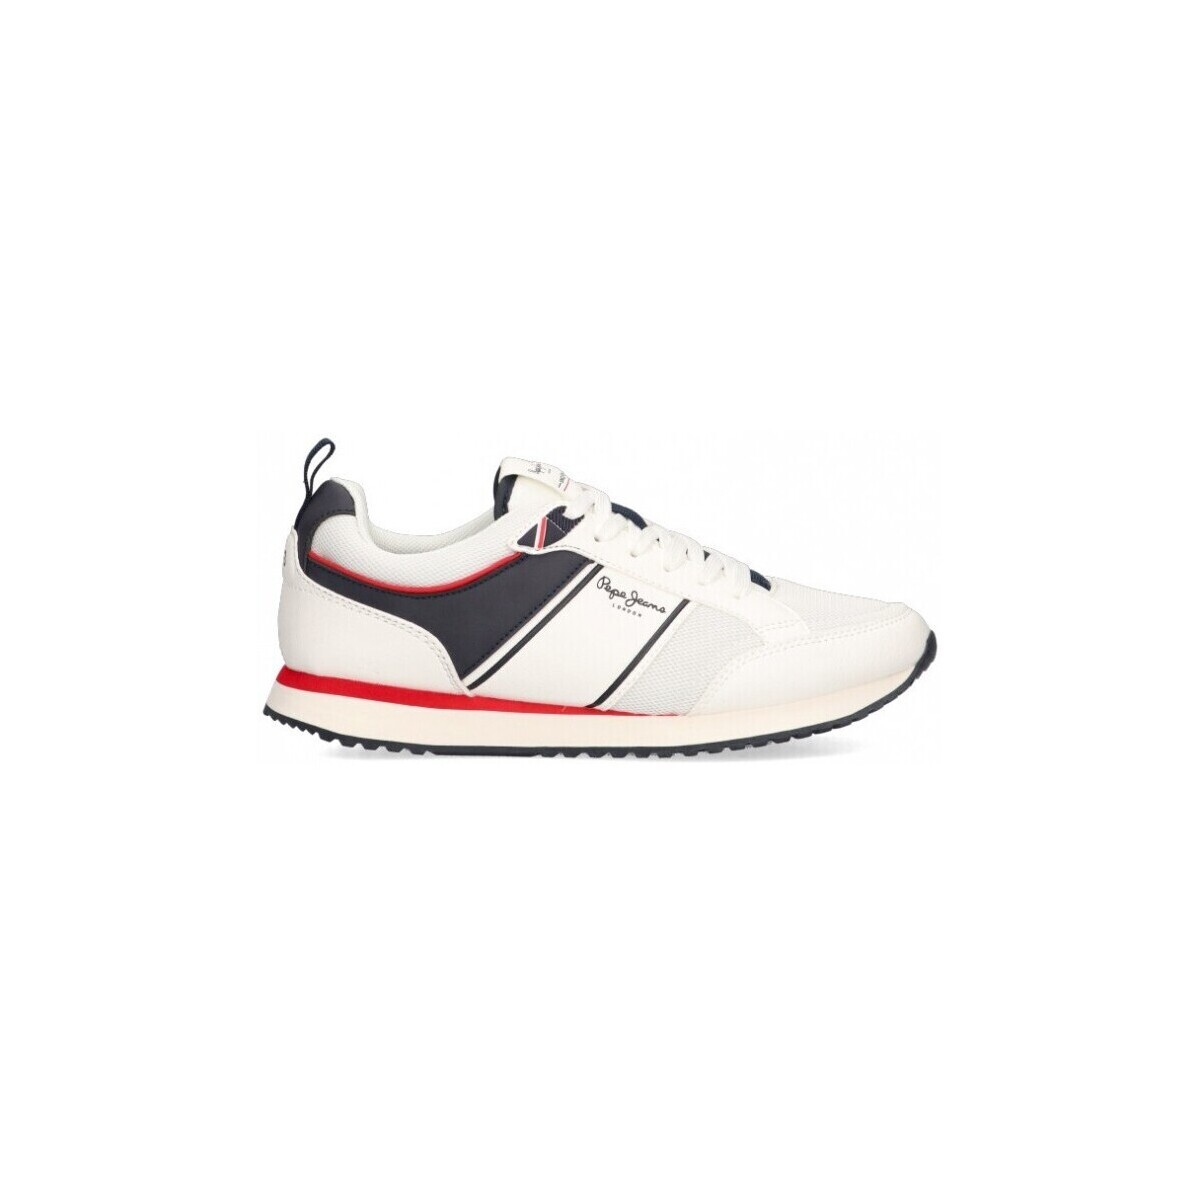 Pepe jeans  Sneakers Pepe jeans 74314